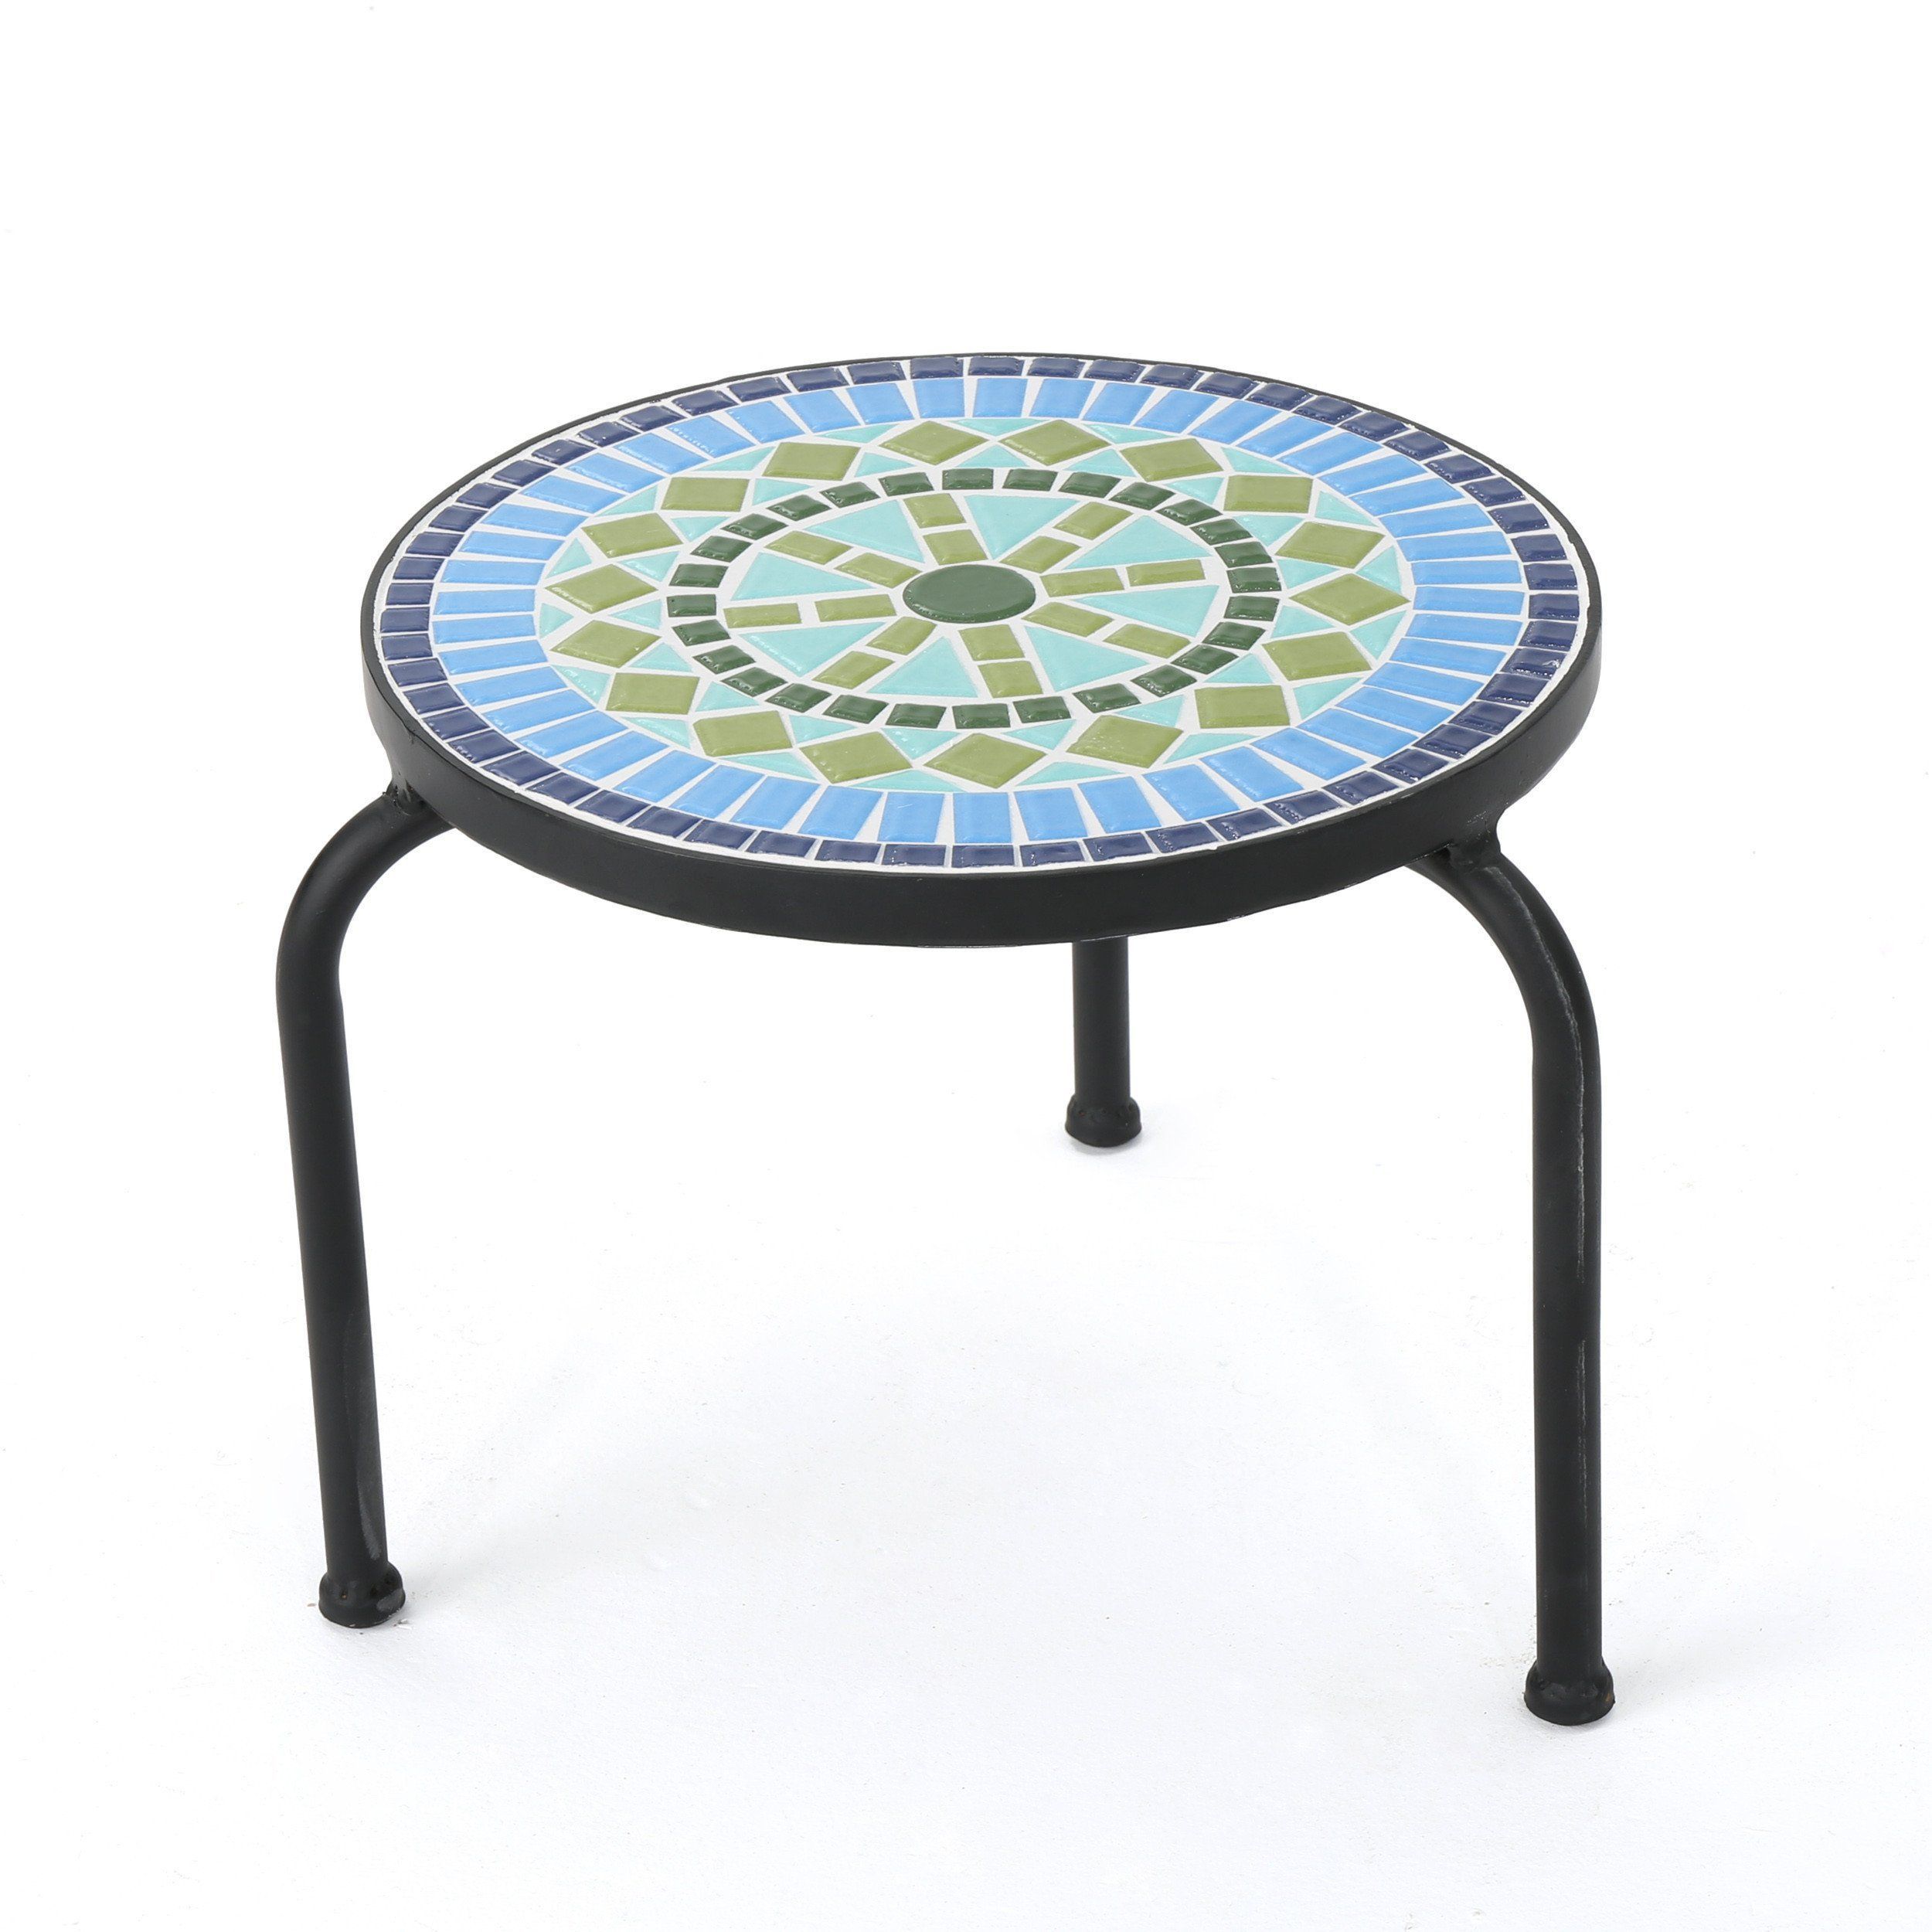 isildur outdoor blue green ceramic tile iron frame side table accent hampton bay seat cushions tall silver lamps black and grey rug emerald dining chairs farm with bench west elm